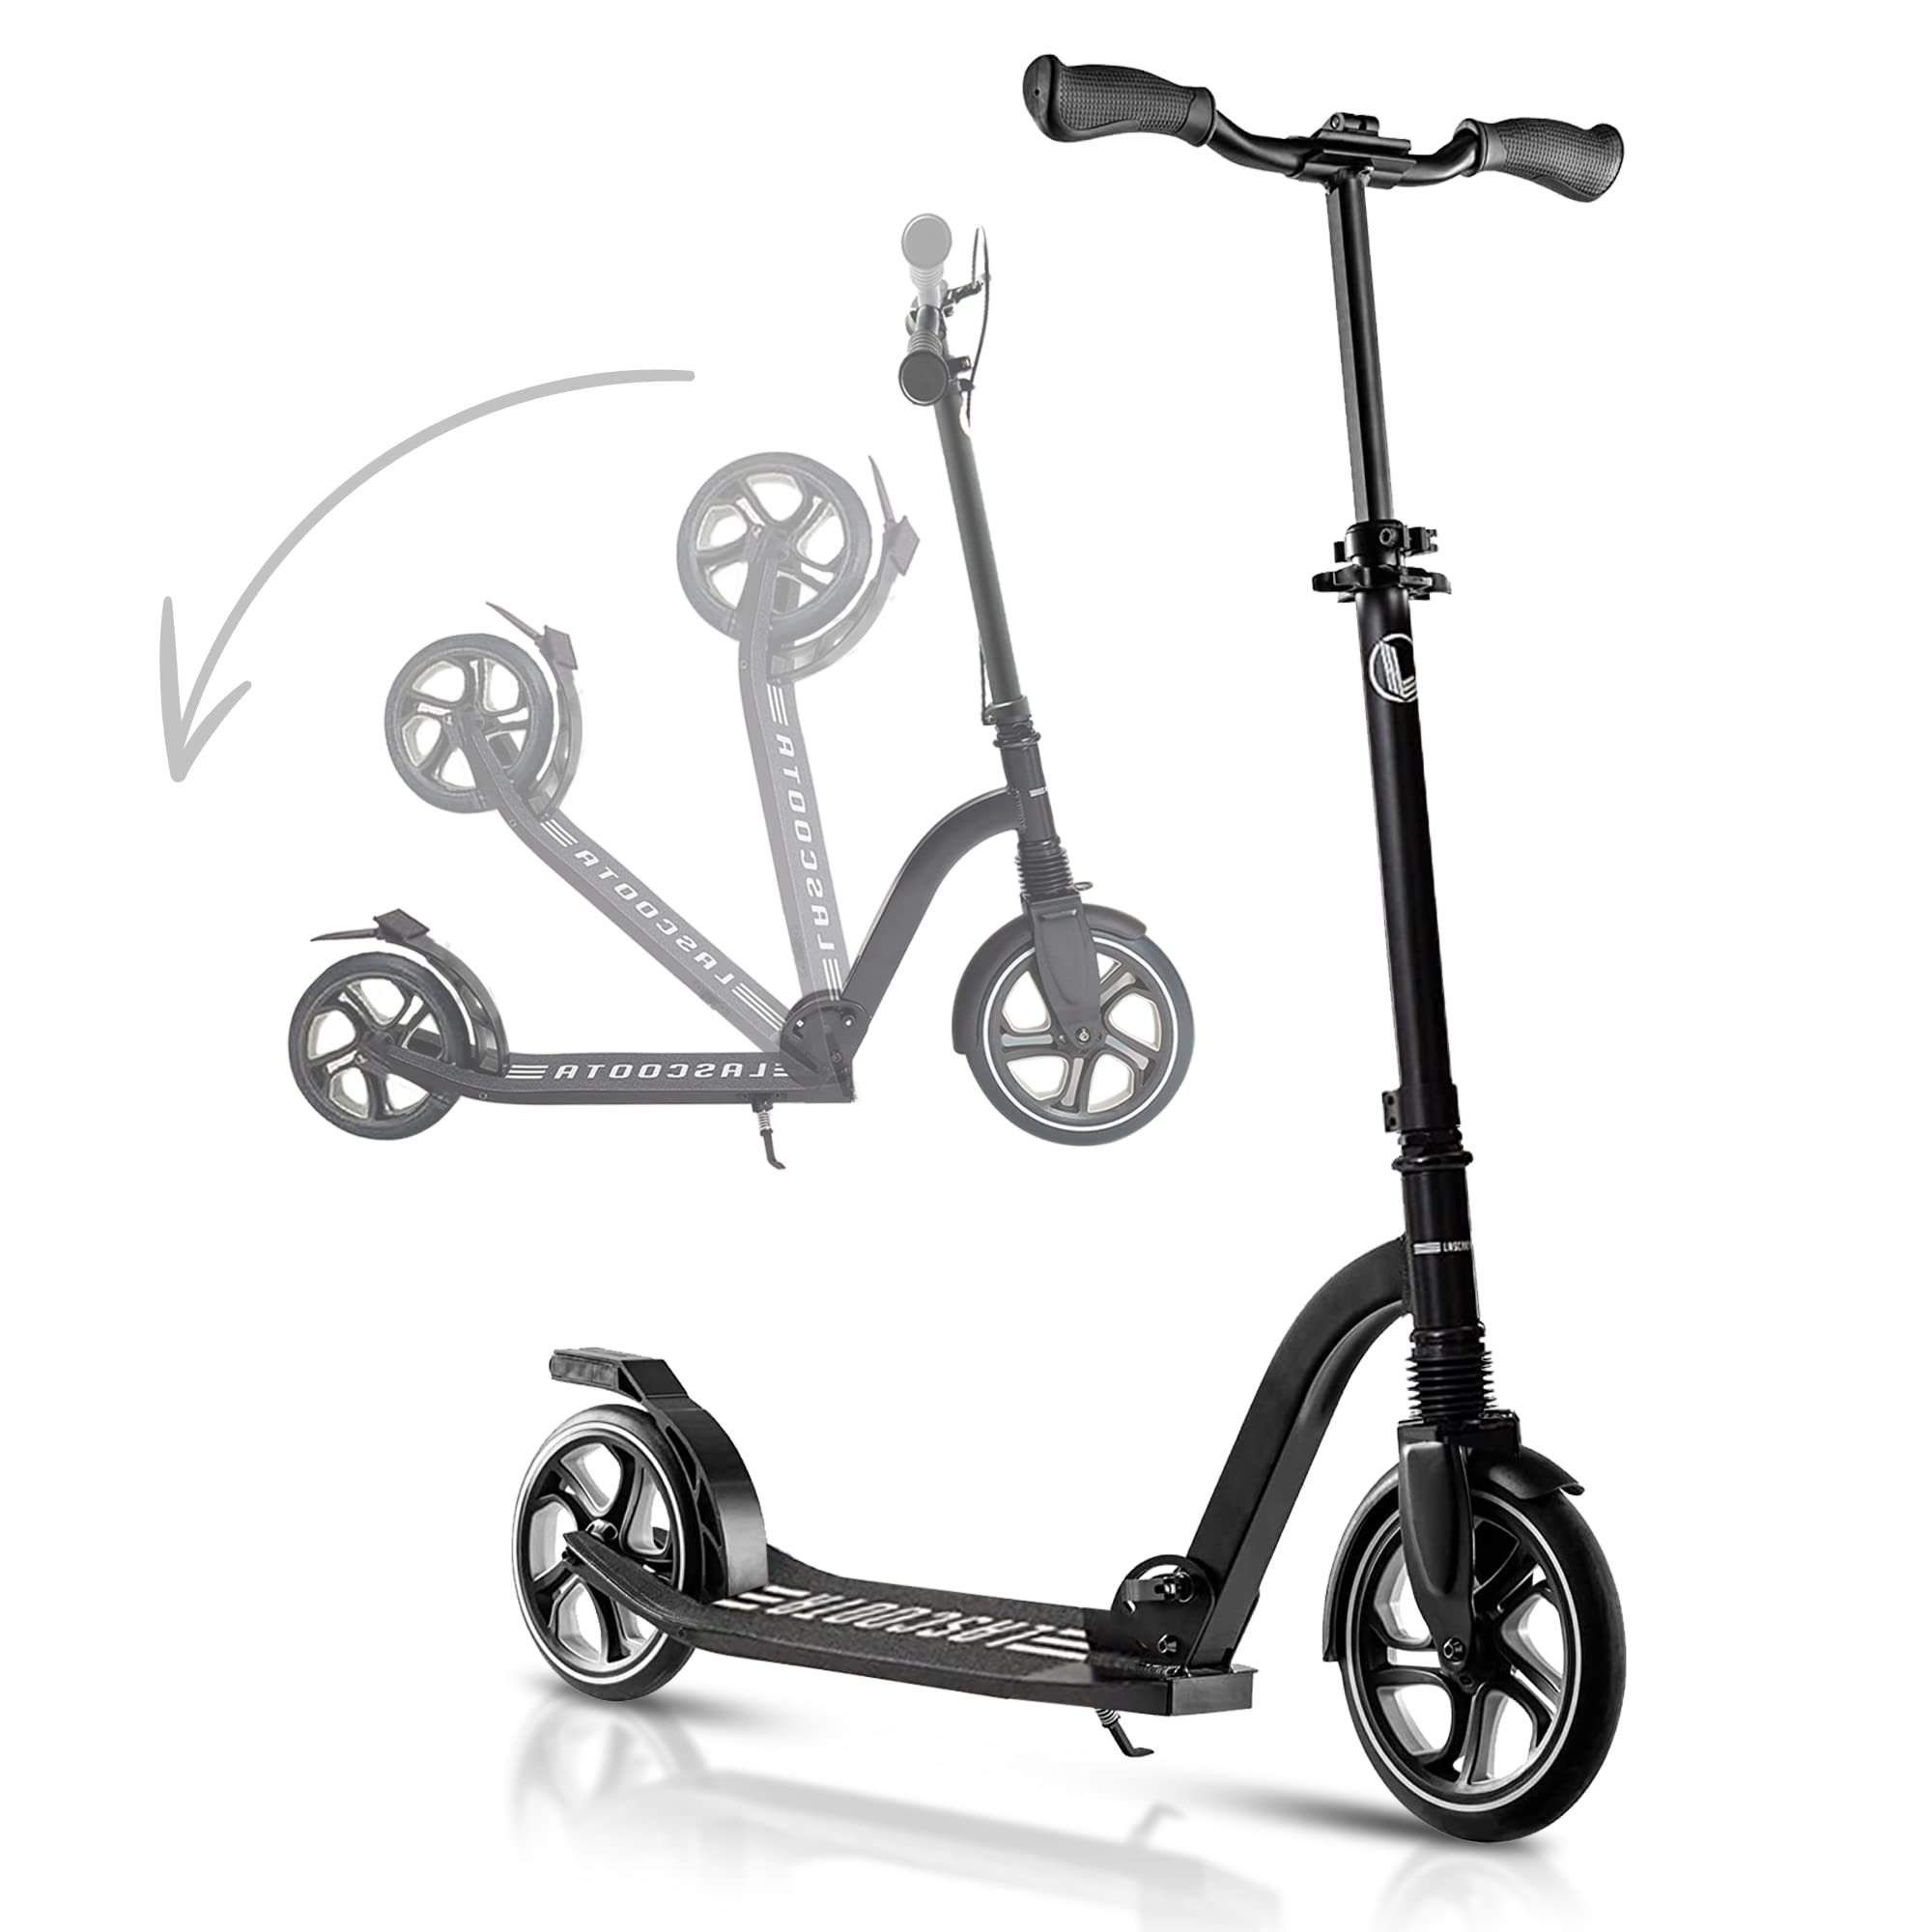 LaScoota Professional Scooter for Ages 6+, Teens & Adults - Lightweight & Big Sturdy Wheels for Kids, Teen & Adults. Adjustable Handlebar, Foldable Kick Scooter for Indoor & Outdoor, Great Gift & Toy